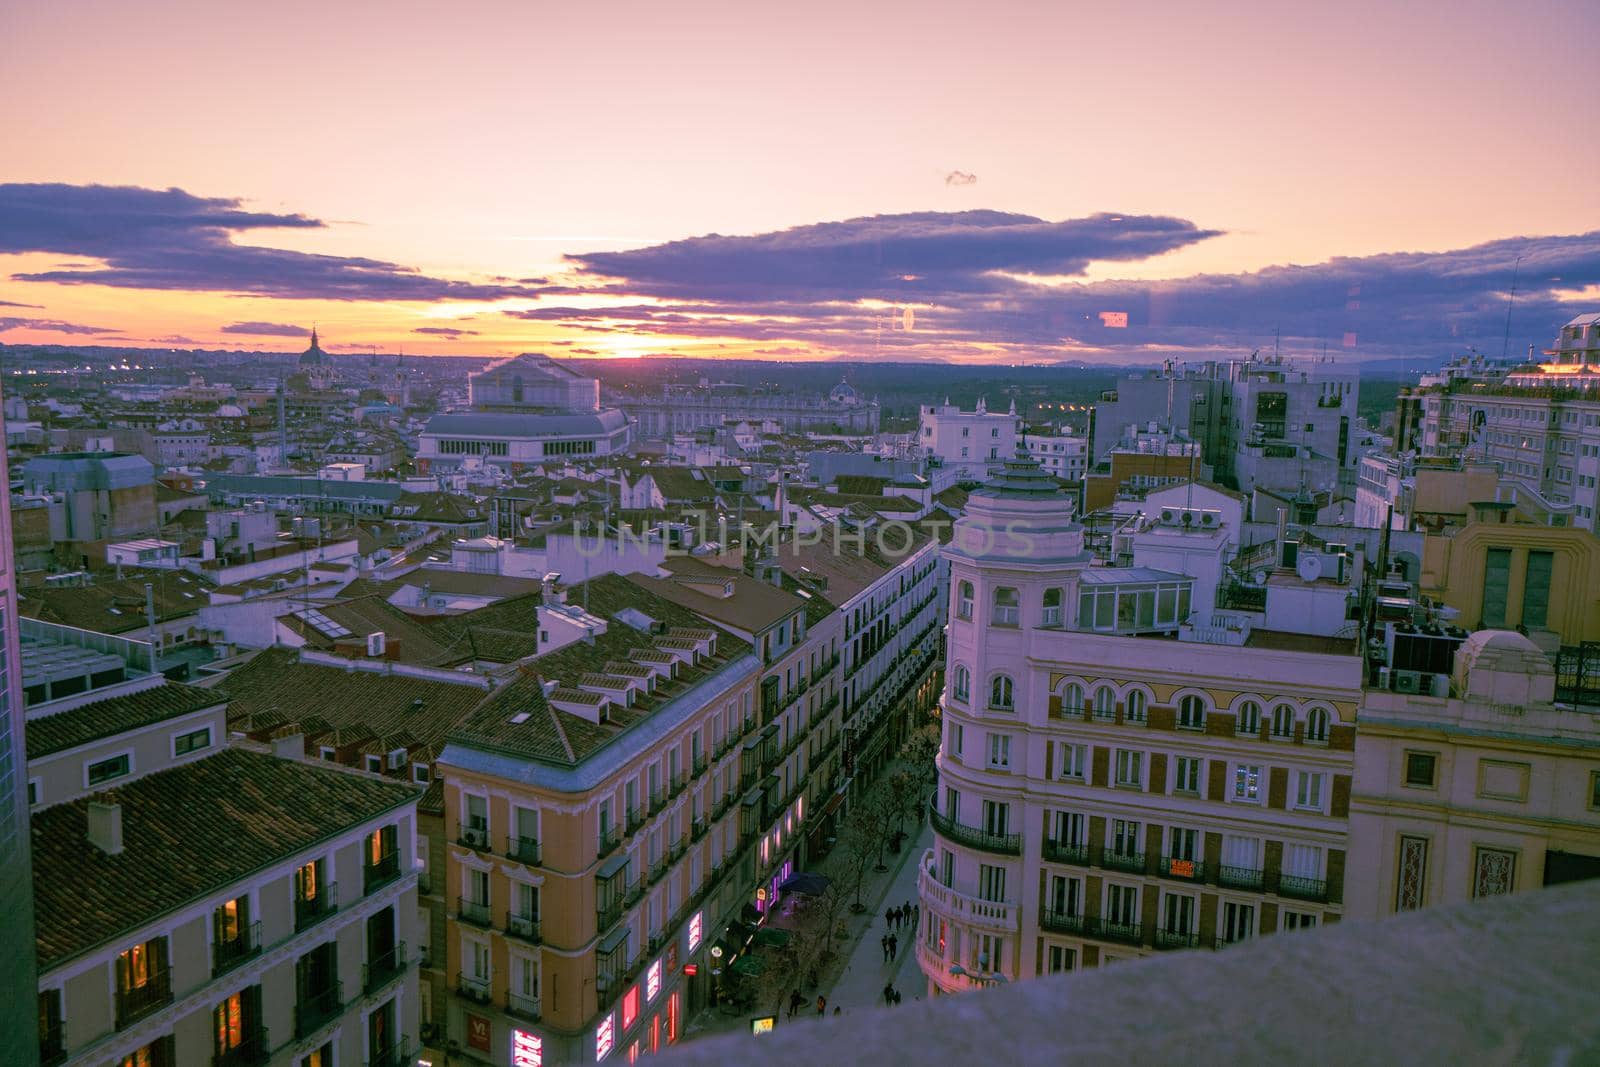 Views of the city of madrid from above